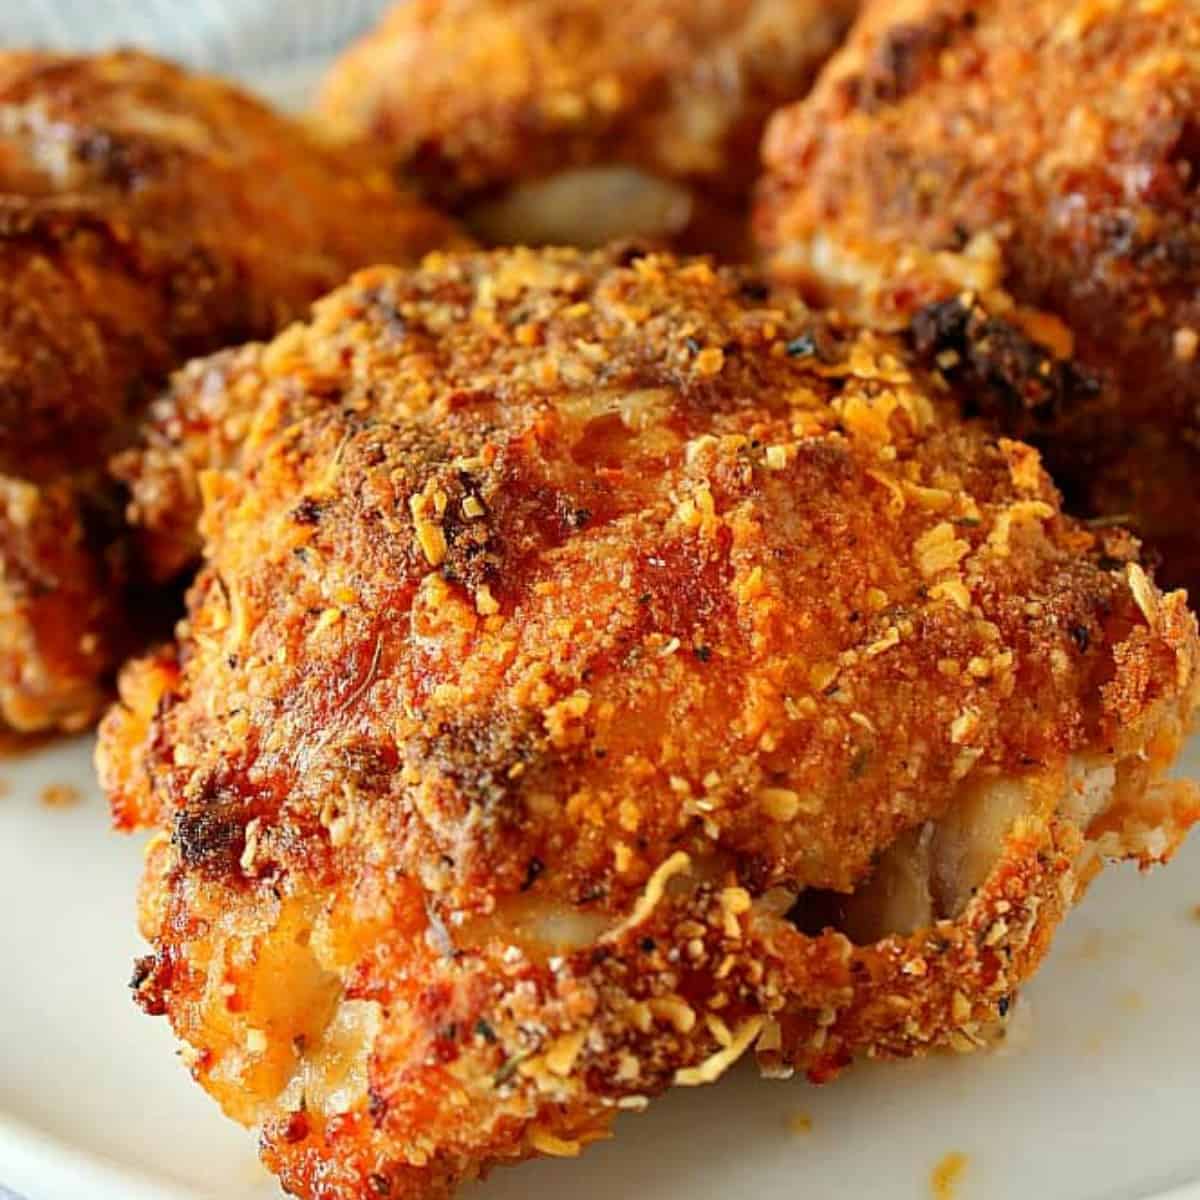 AIR-FRYER FRIED CHICKEN WITH A SPICY HONEY SAUCE